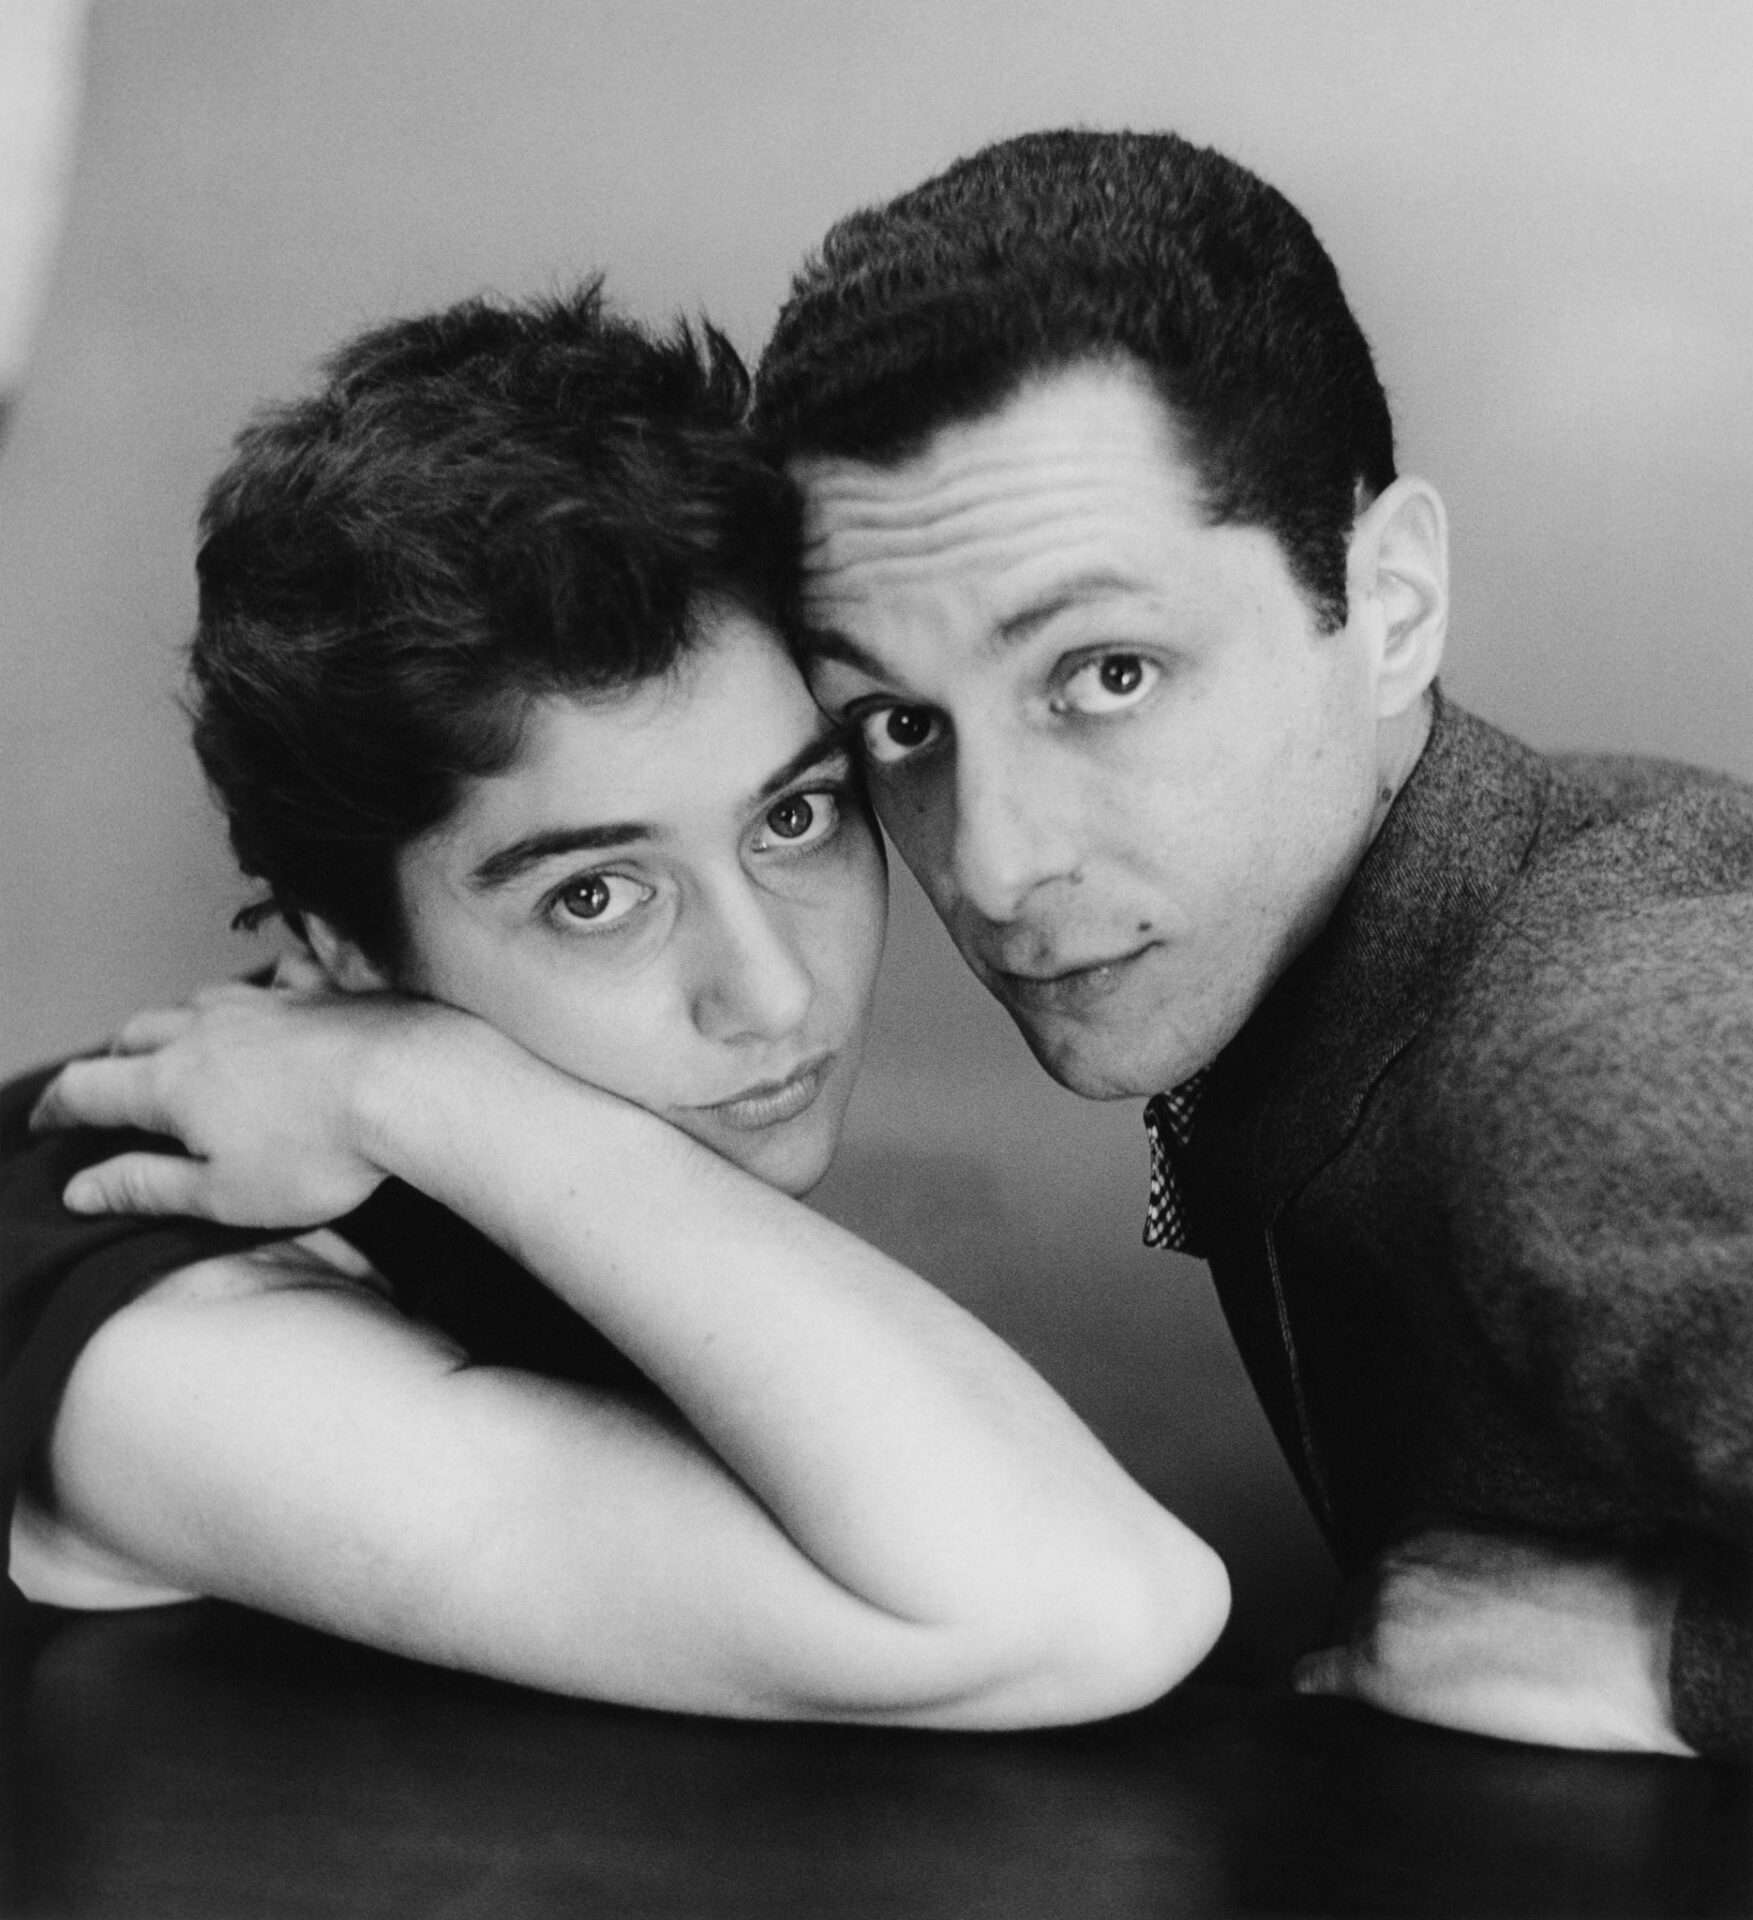 Diane Arbus's husband Allan and her